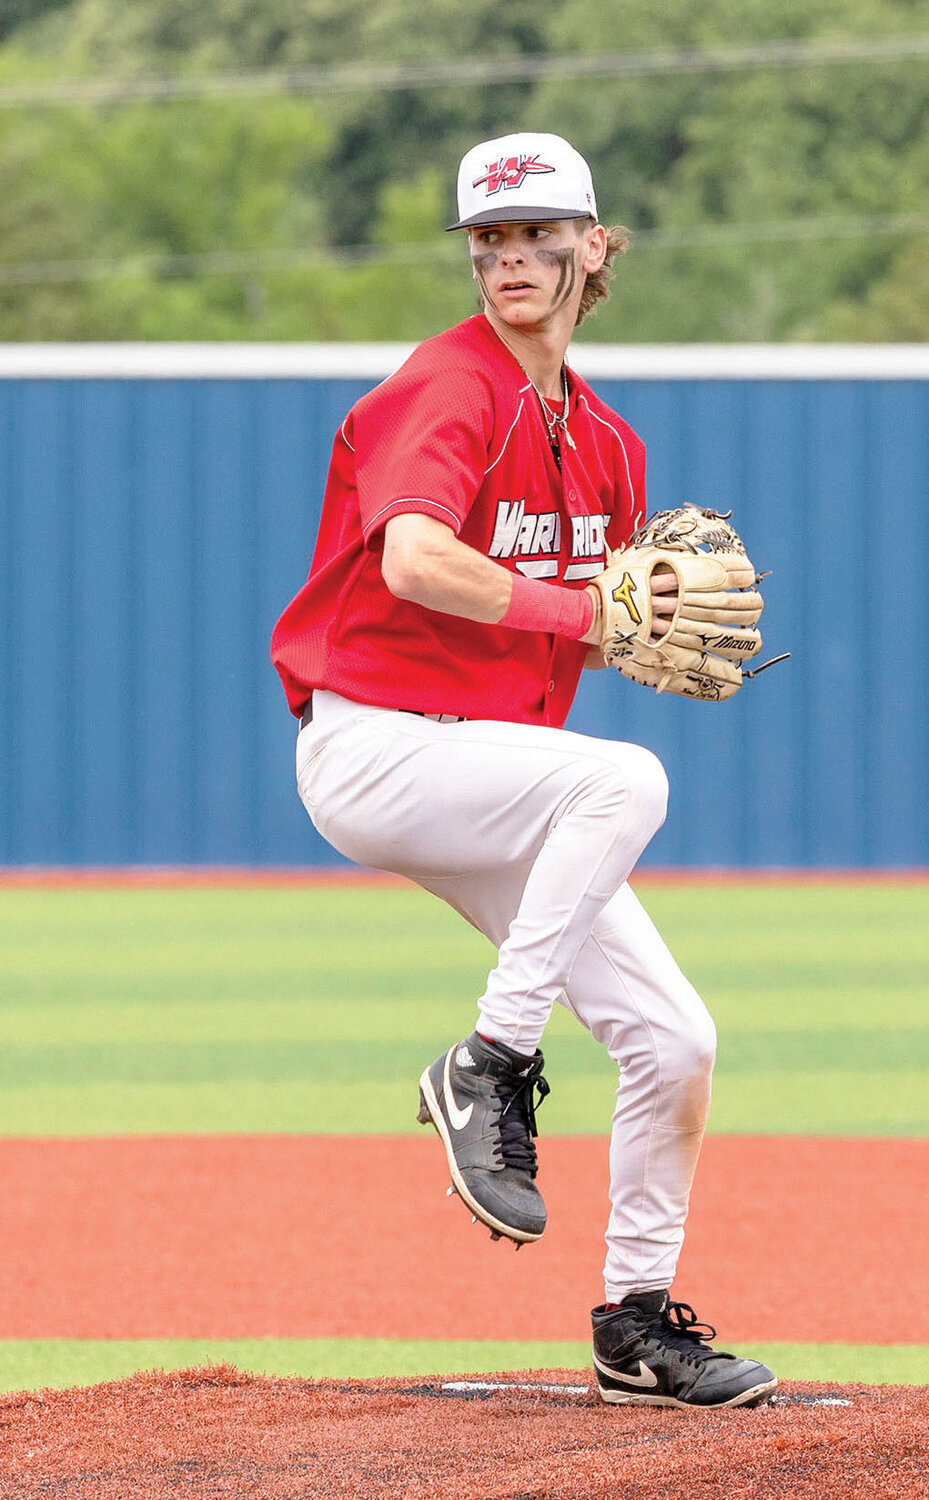 Washington junior Tristin Babbitt pitched a complete game shutout in the State semifinals against Salina on Friday. The Warriors defeated the Wildcats 3-0 to advance to the State finals, which they won against Cascia Hall. Babbitt had eight strikeouts in the game. Full story on page 1A.